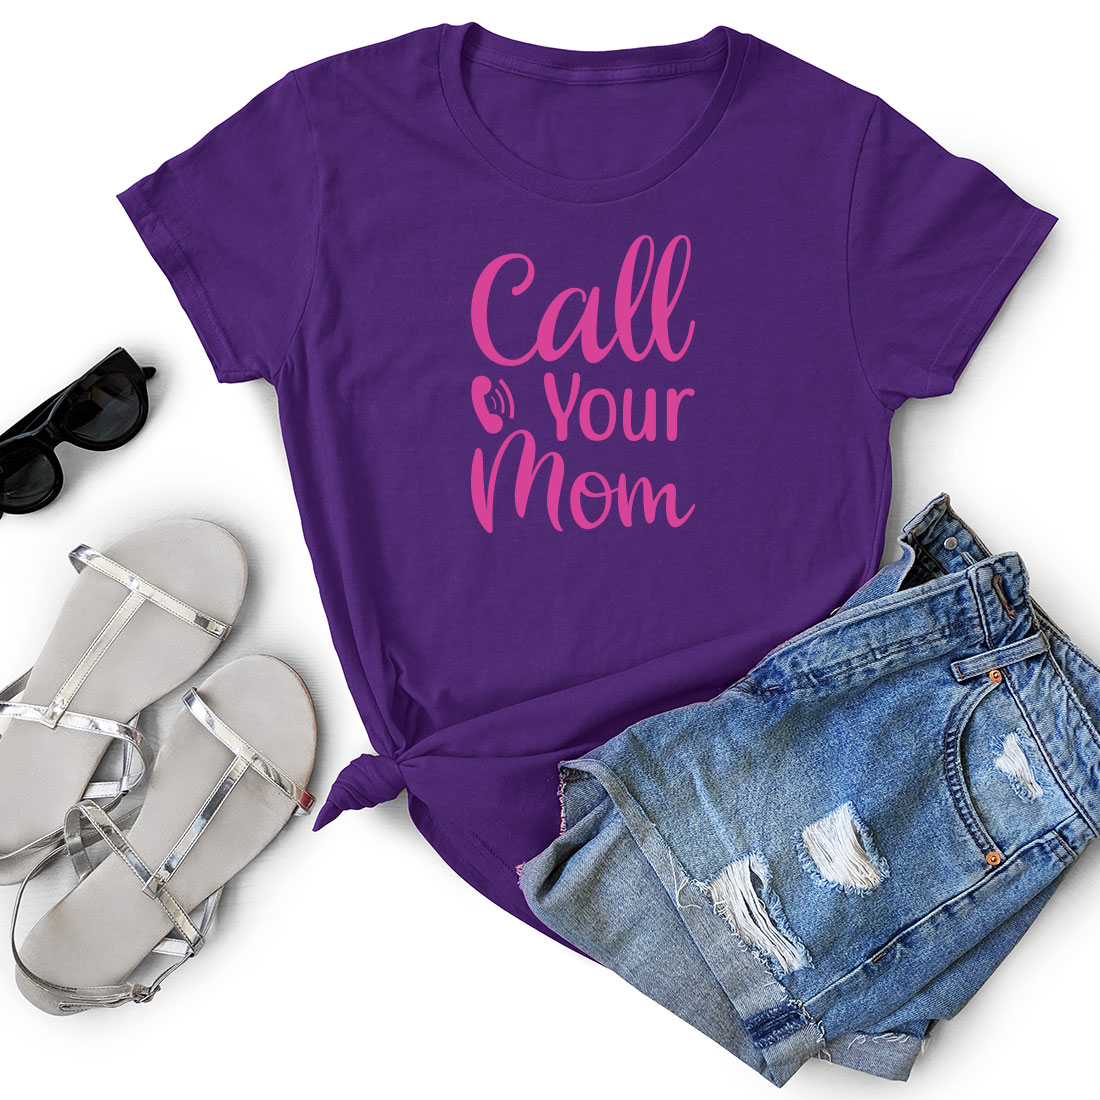 T - shirt that says call o your mom next to a pair of shorts.